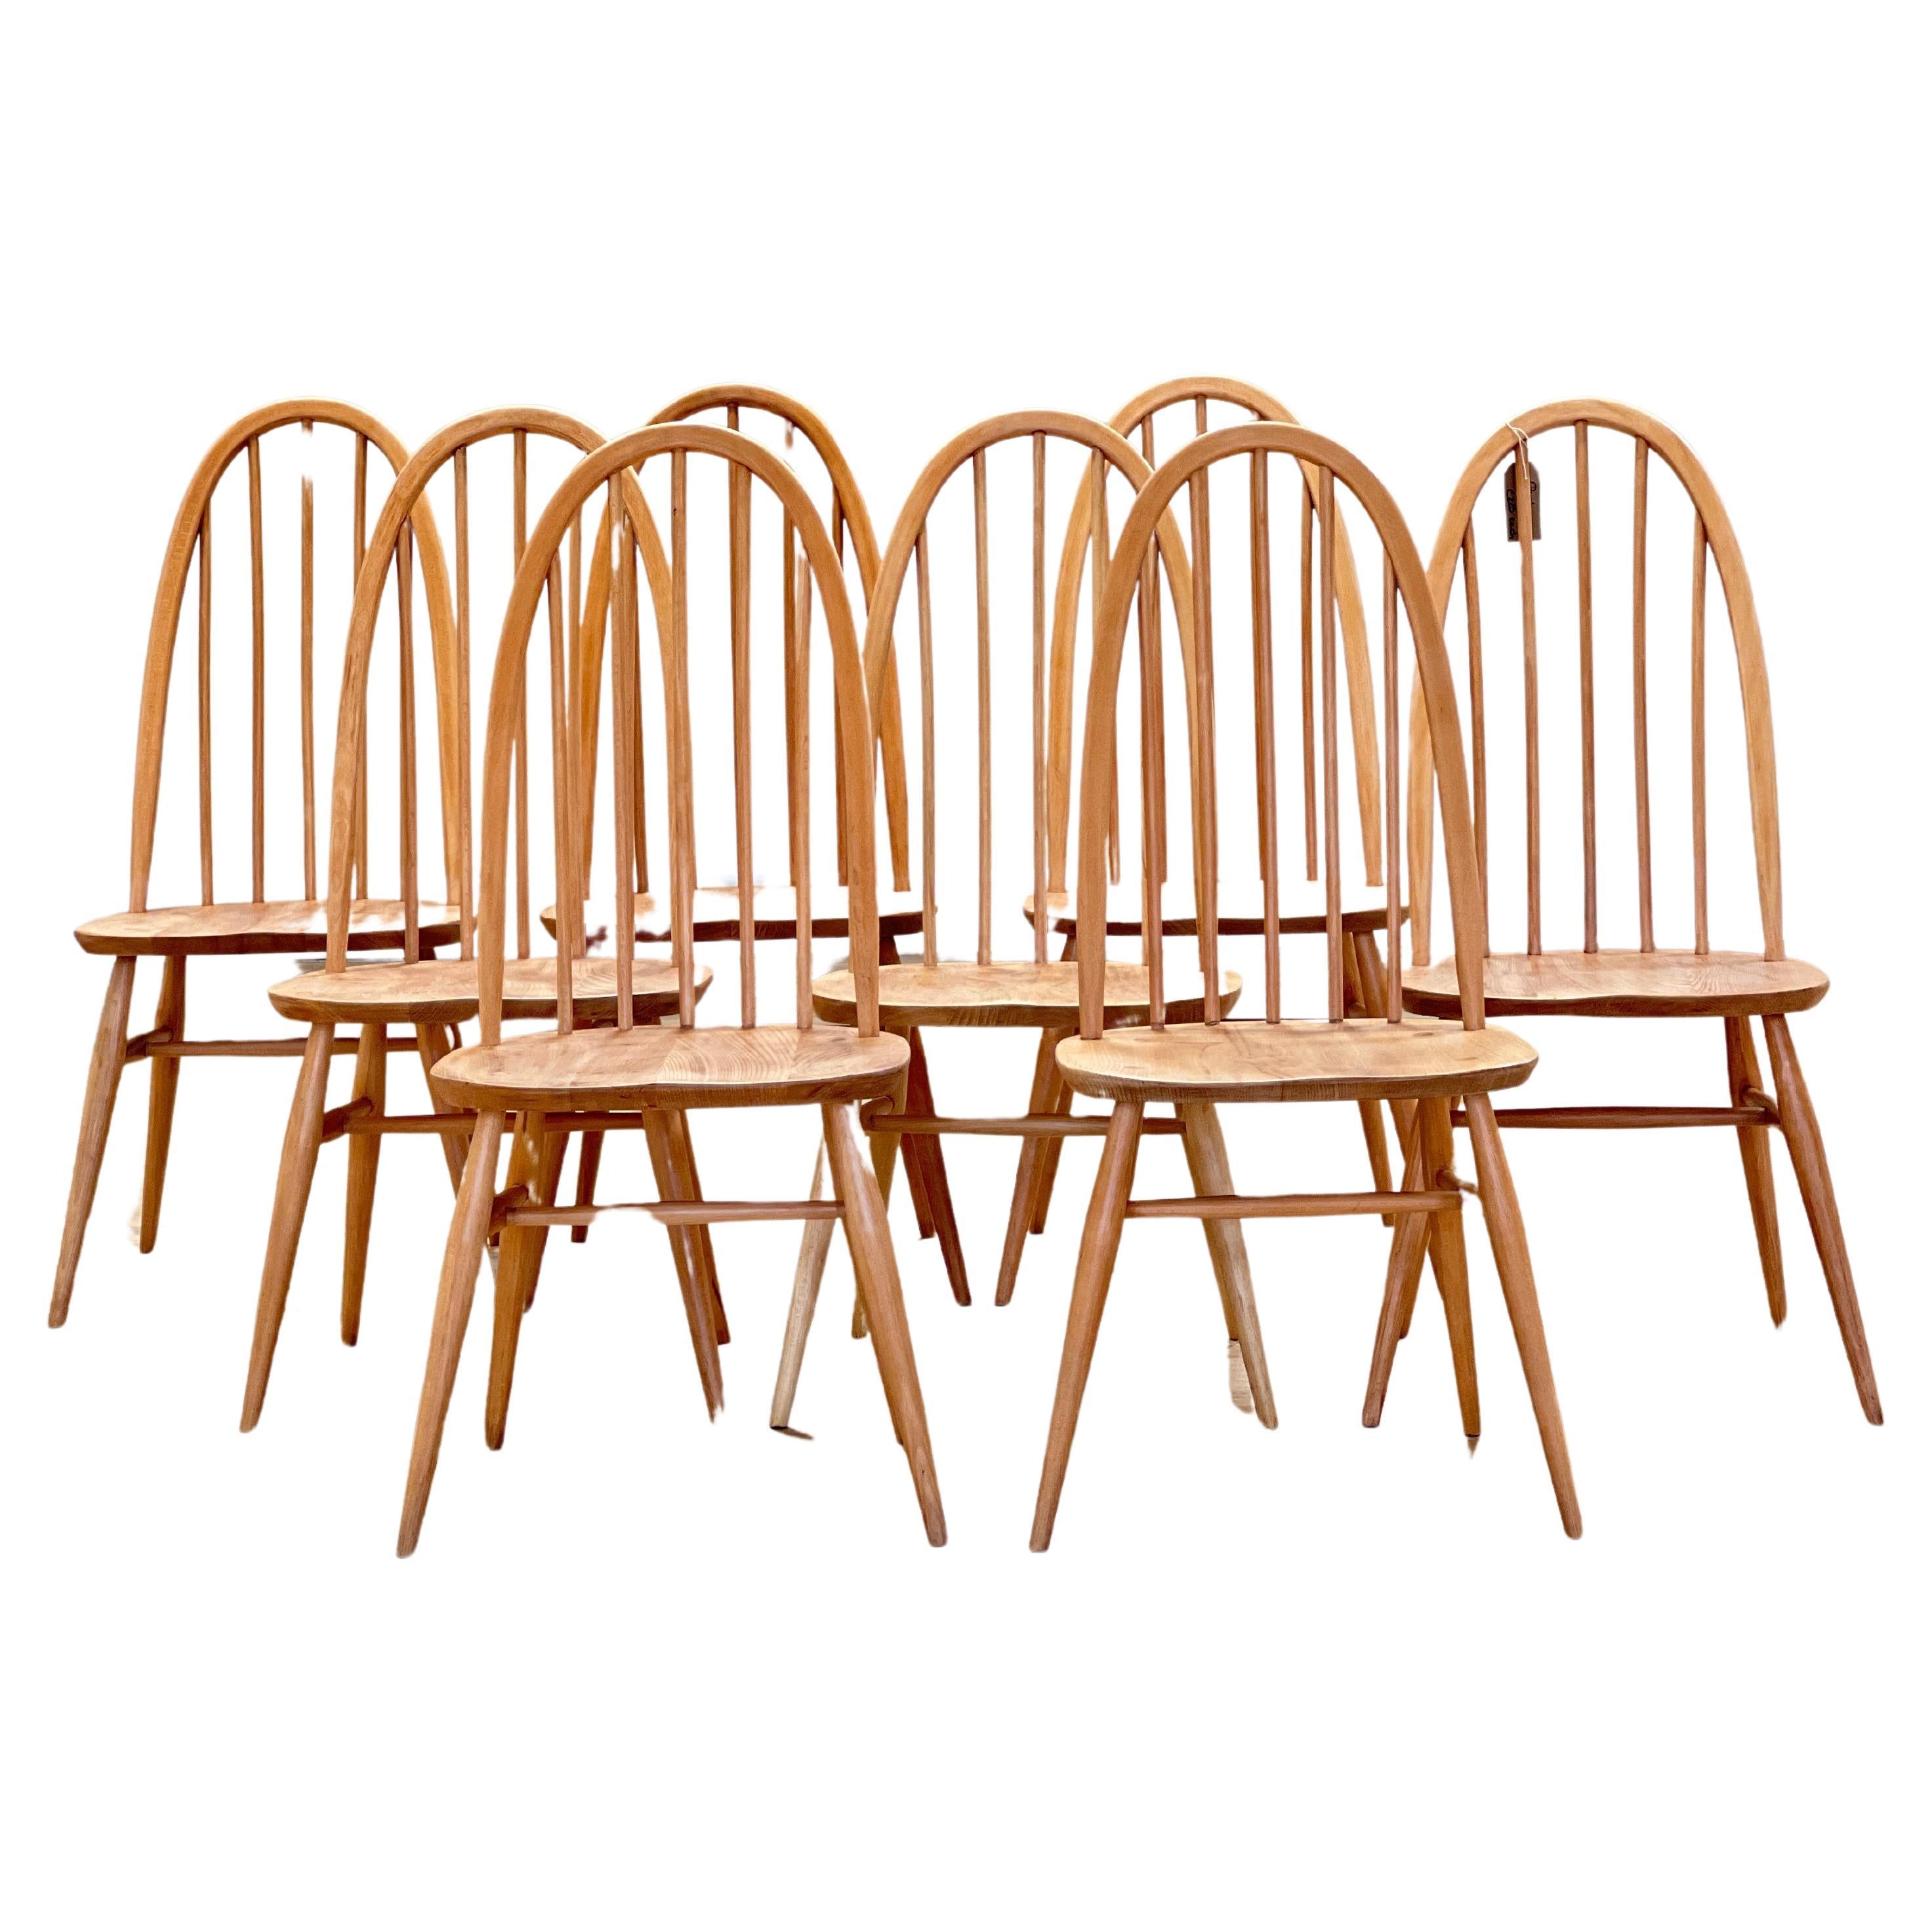 How can you tell if furniture is Ercol?